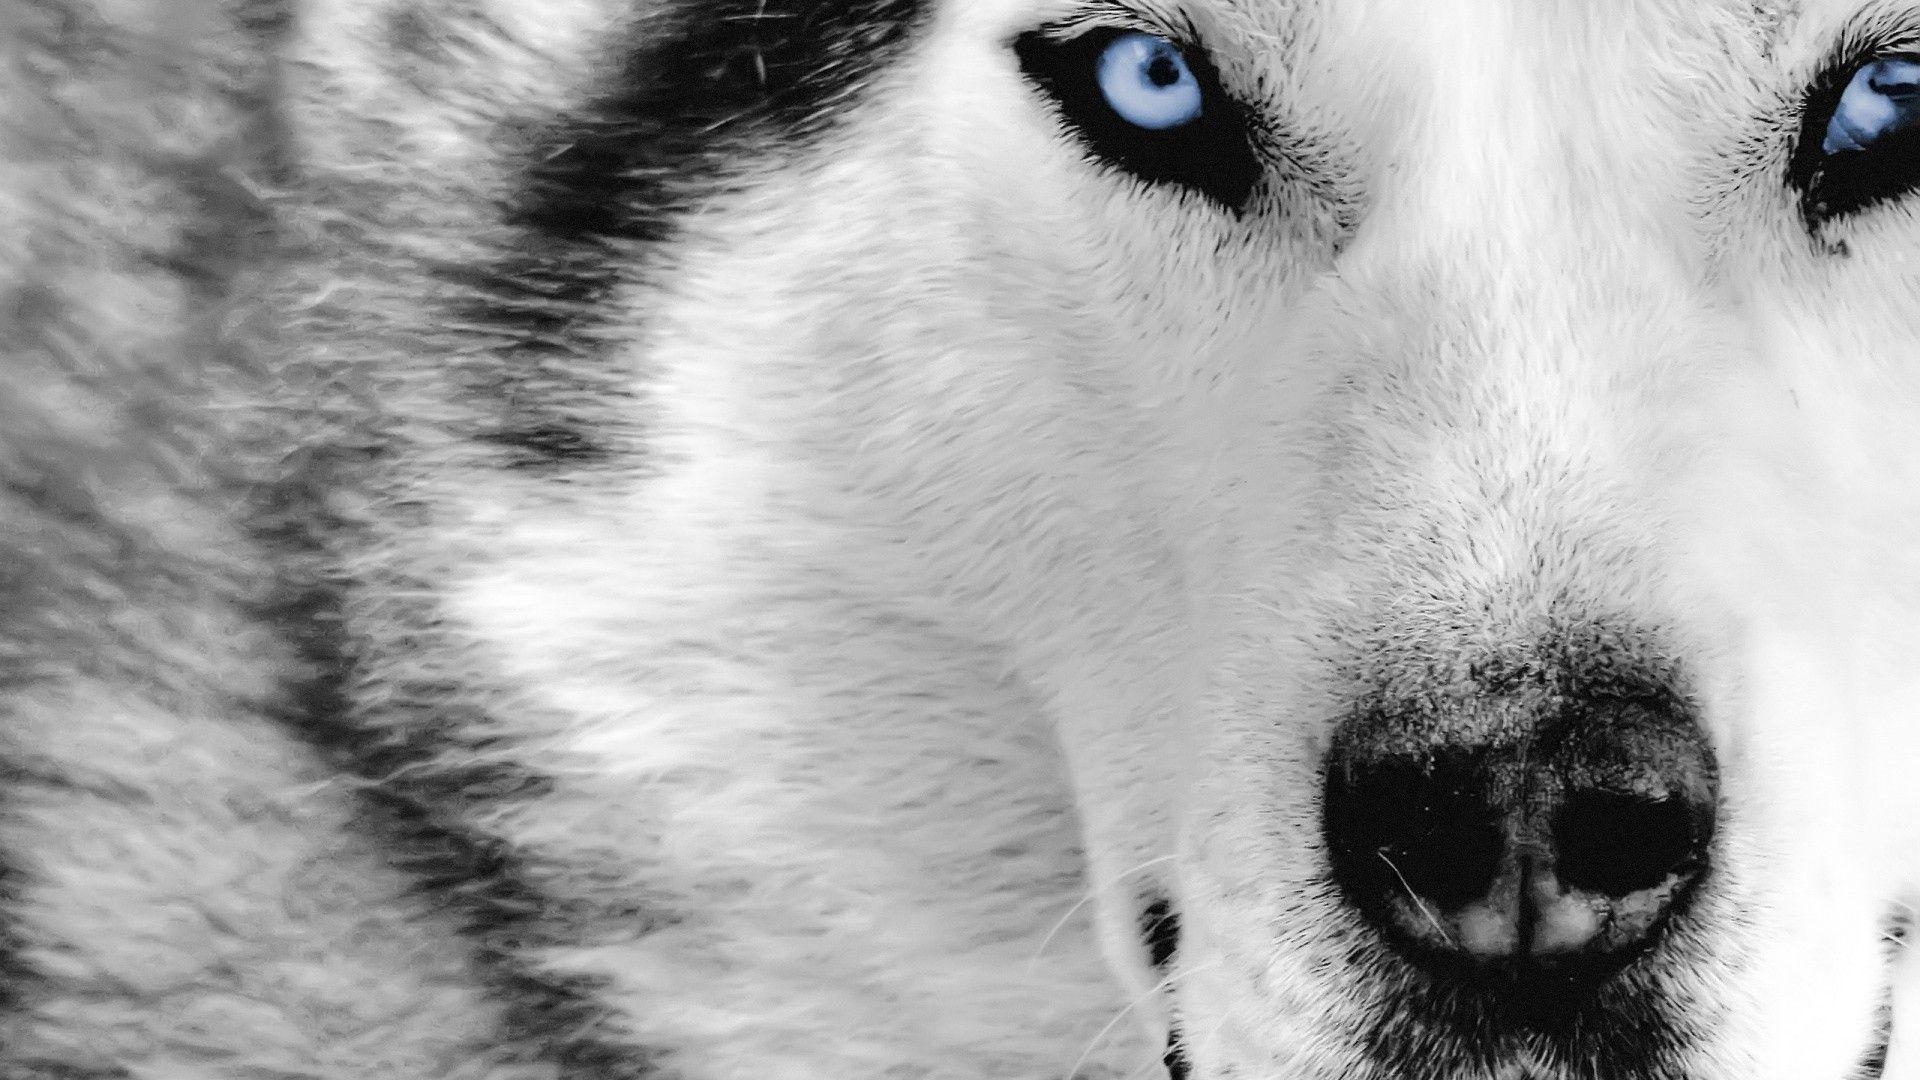 Arctic Wolf With Blue Eyes Wallpaper